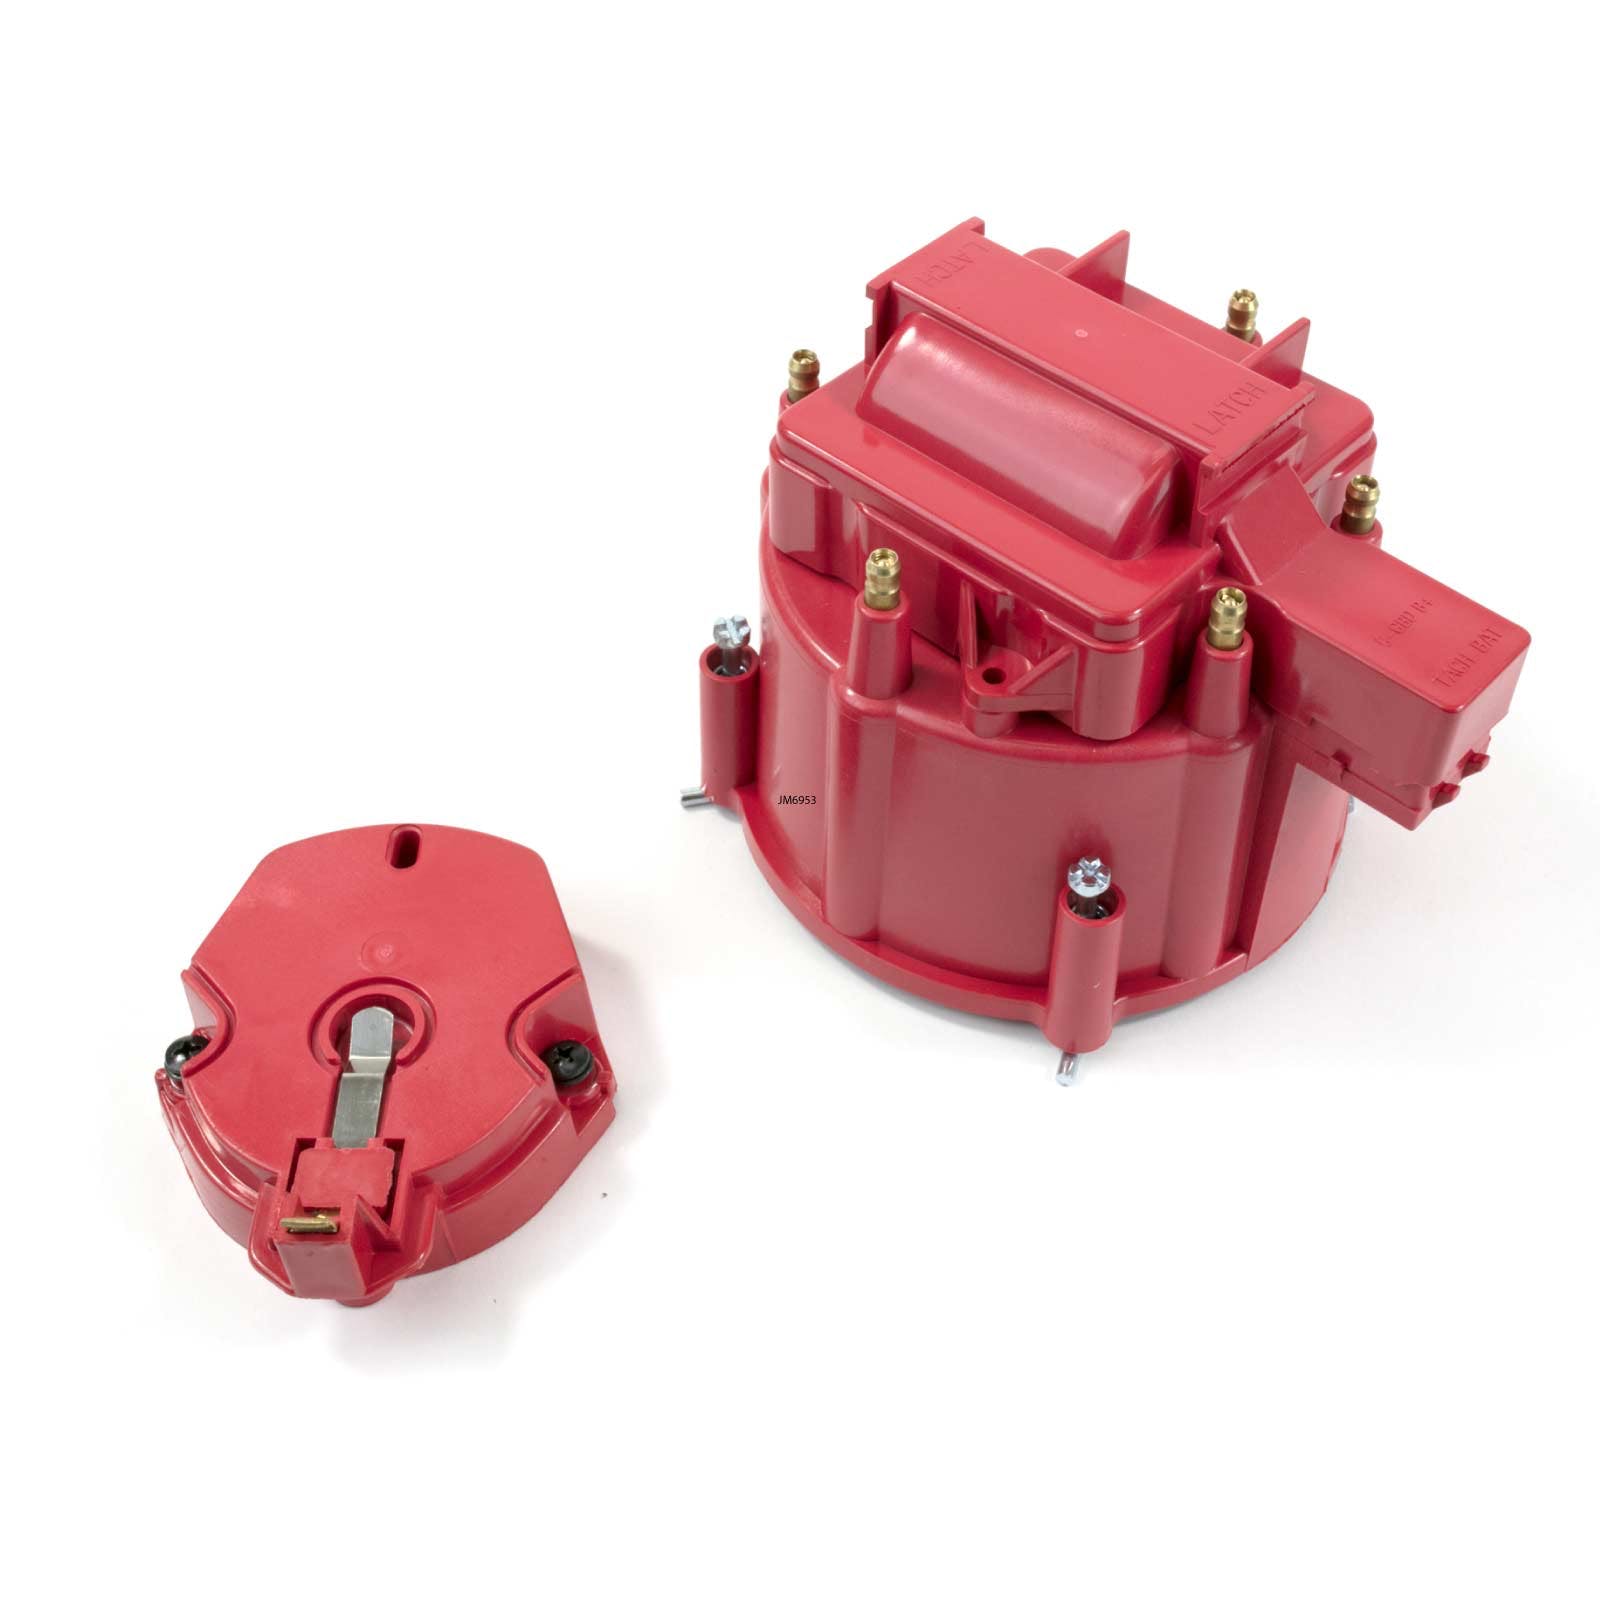 Top Street Performance JM6953R HEI Distributor Cap and Rotor Kit Oem Cap, Coil Cover, Rotor, Red